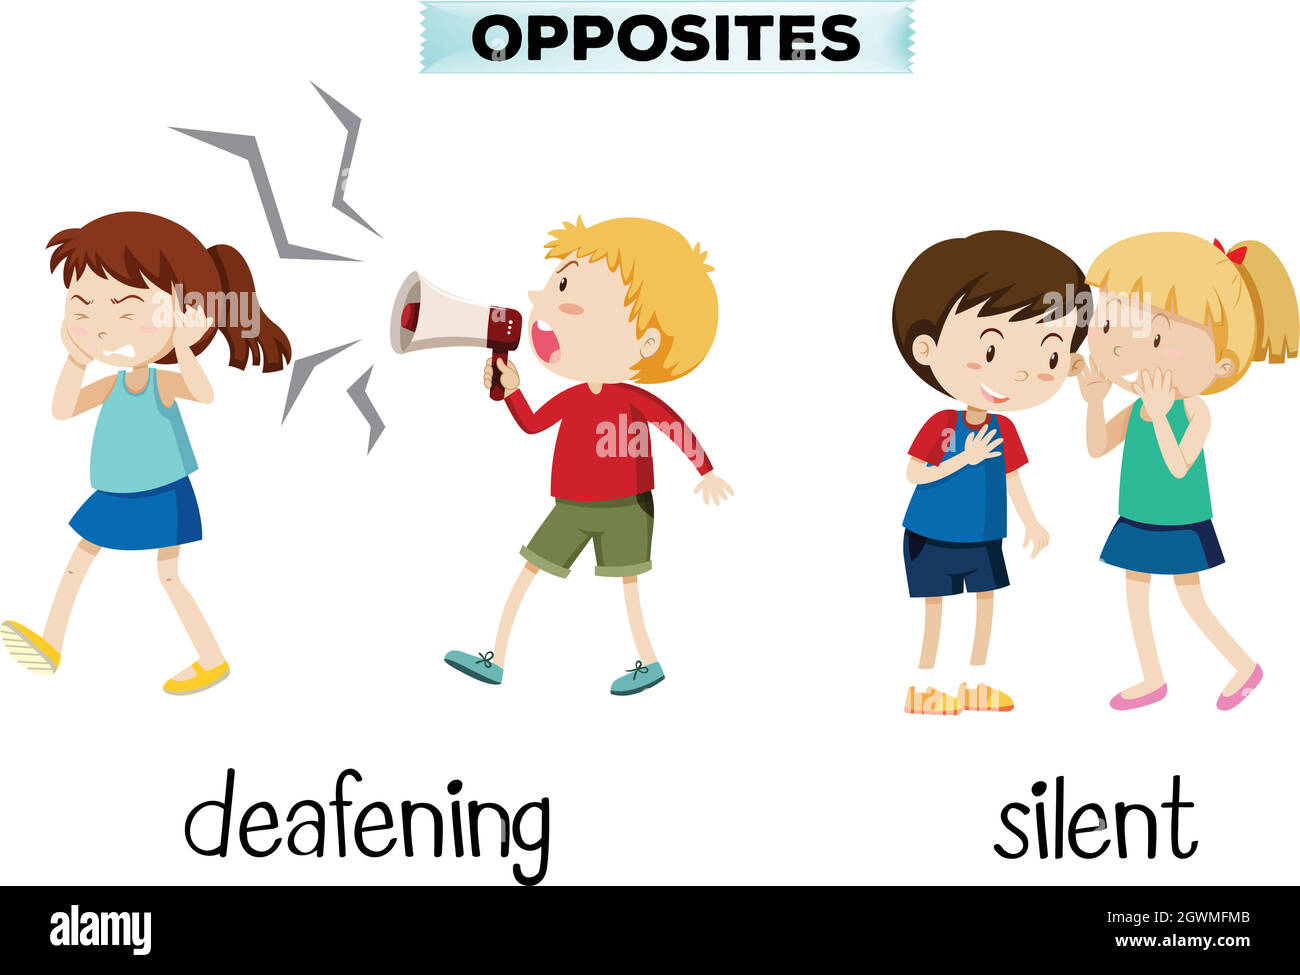 Opposites deafening and silent Stock Vector